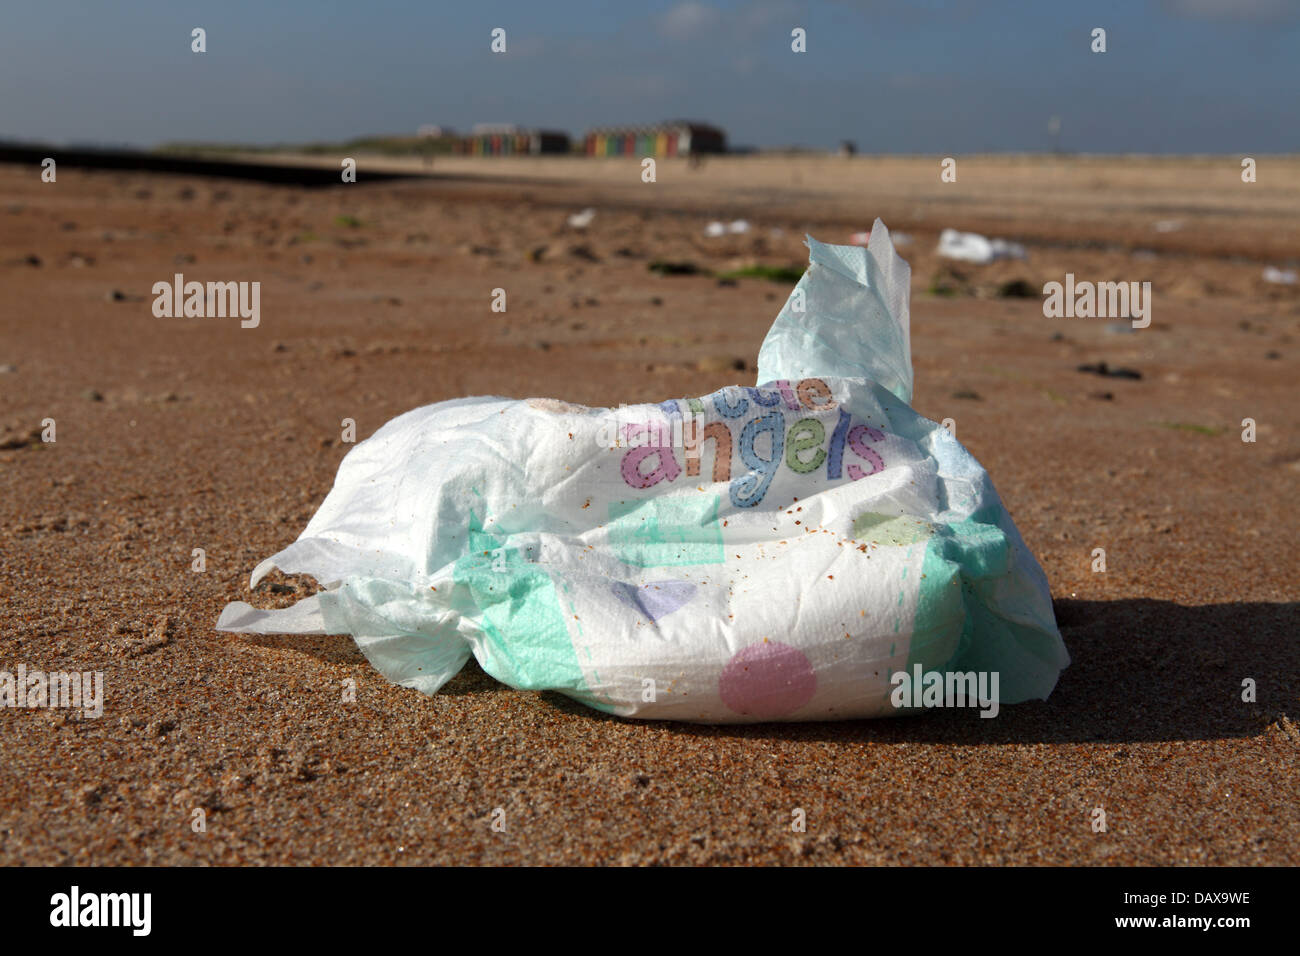 A nappy is among rubbish strewn on the beach at Blyth in Northumberland, England. Stock Photo